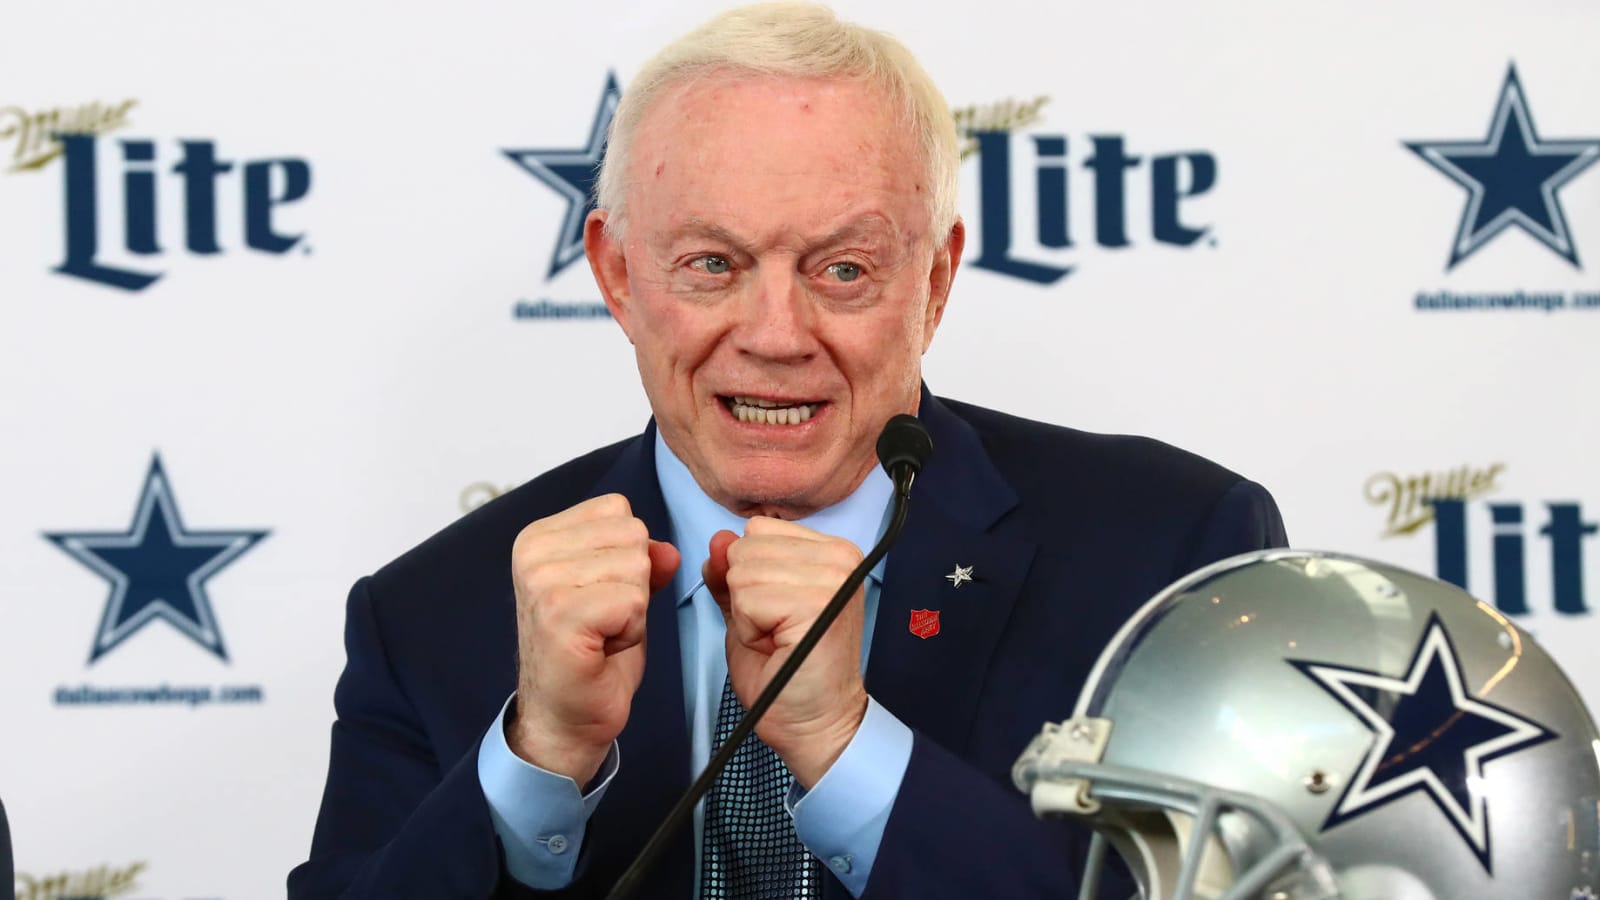 Jerry Jones has not decided if he will change stance on players protesting during national anthem